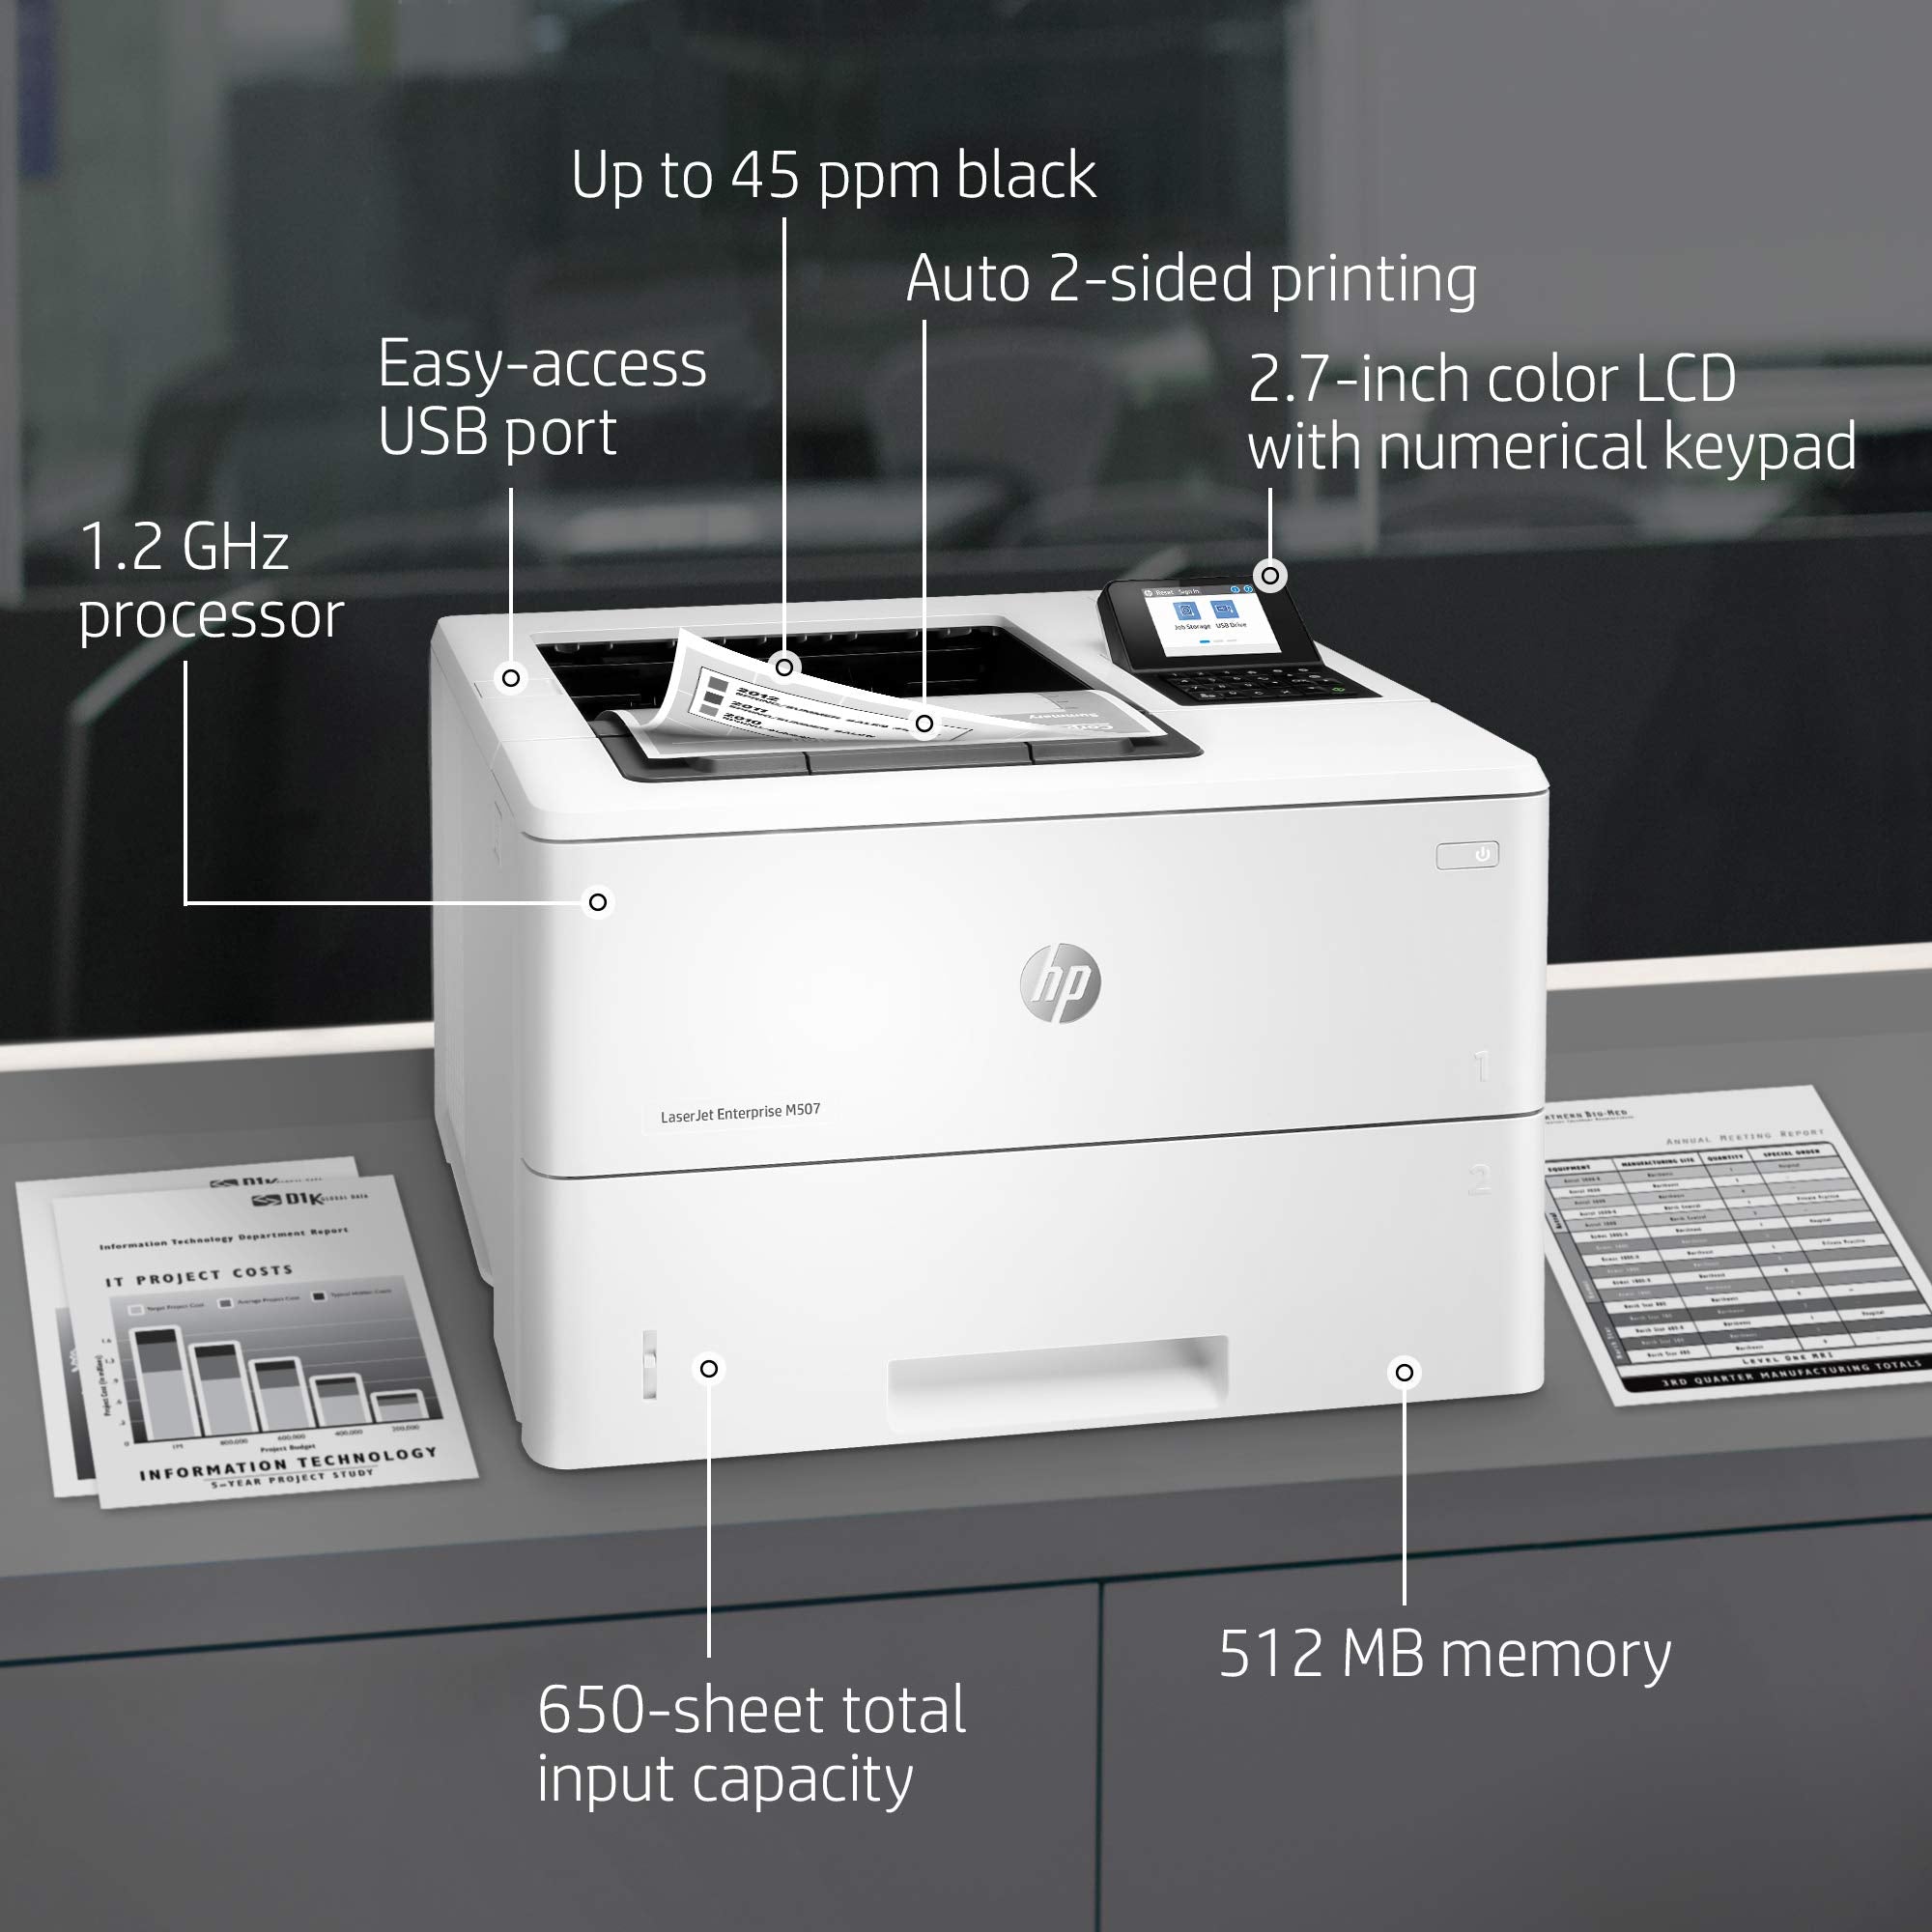 HP Laserjet Enterprise M507dn with One-Year, Next-Business Day, Onsite Warranty (1PV87A)